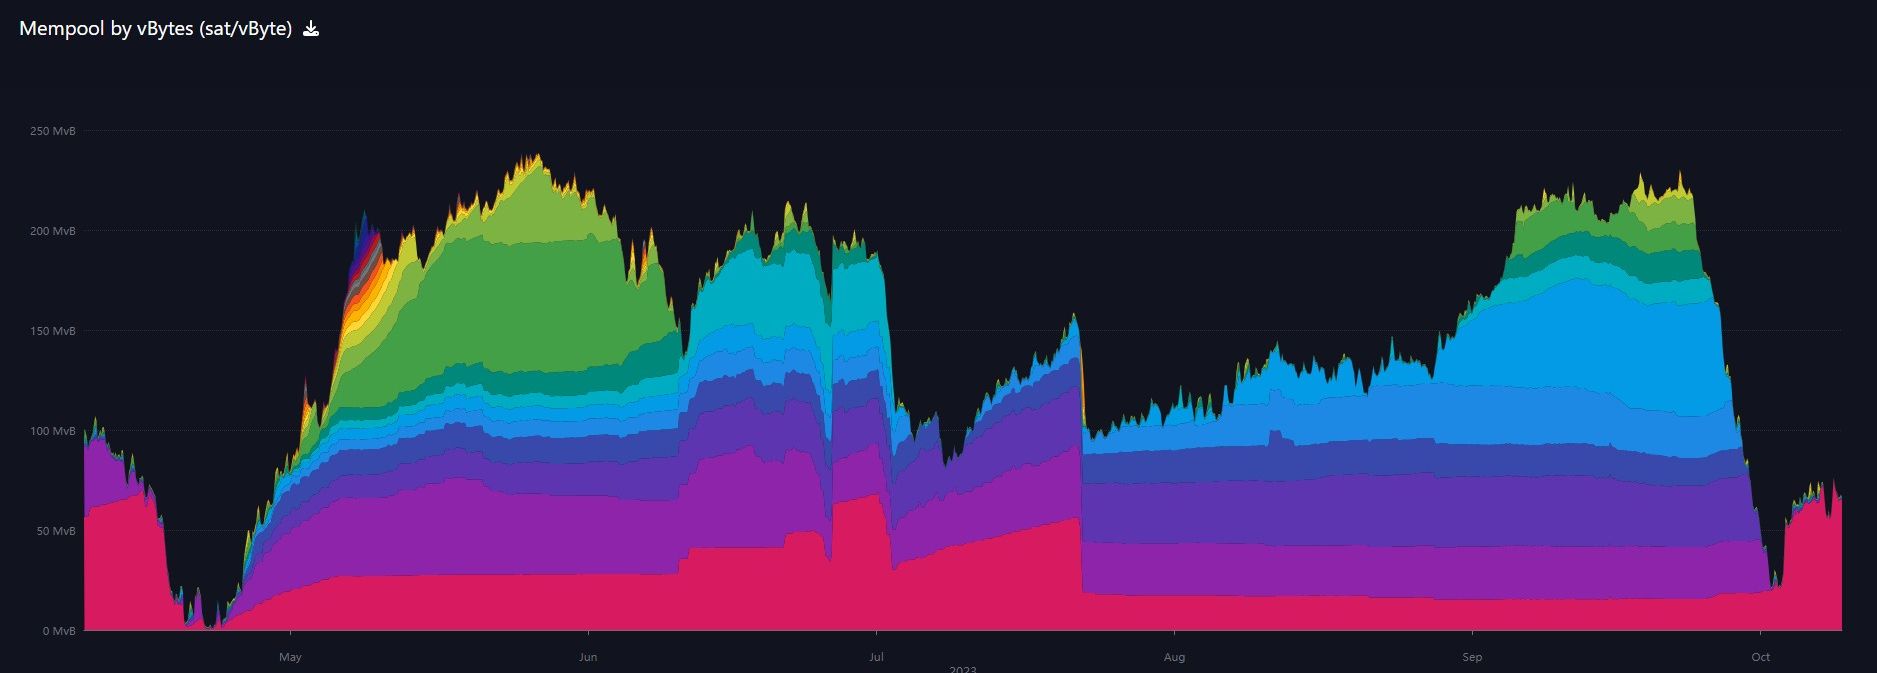 3-month chart of mempool